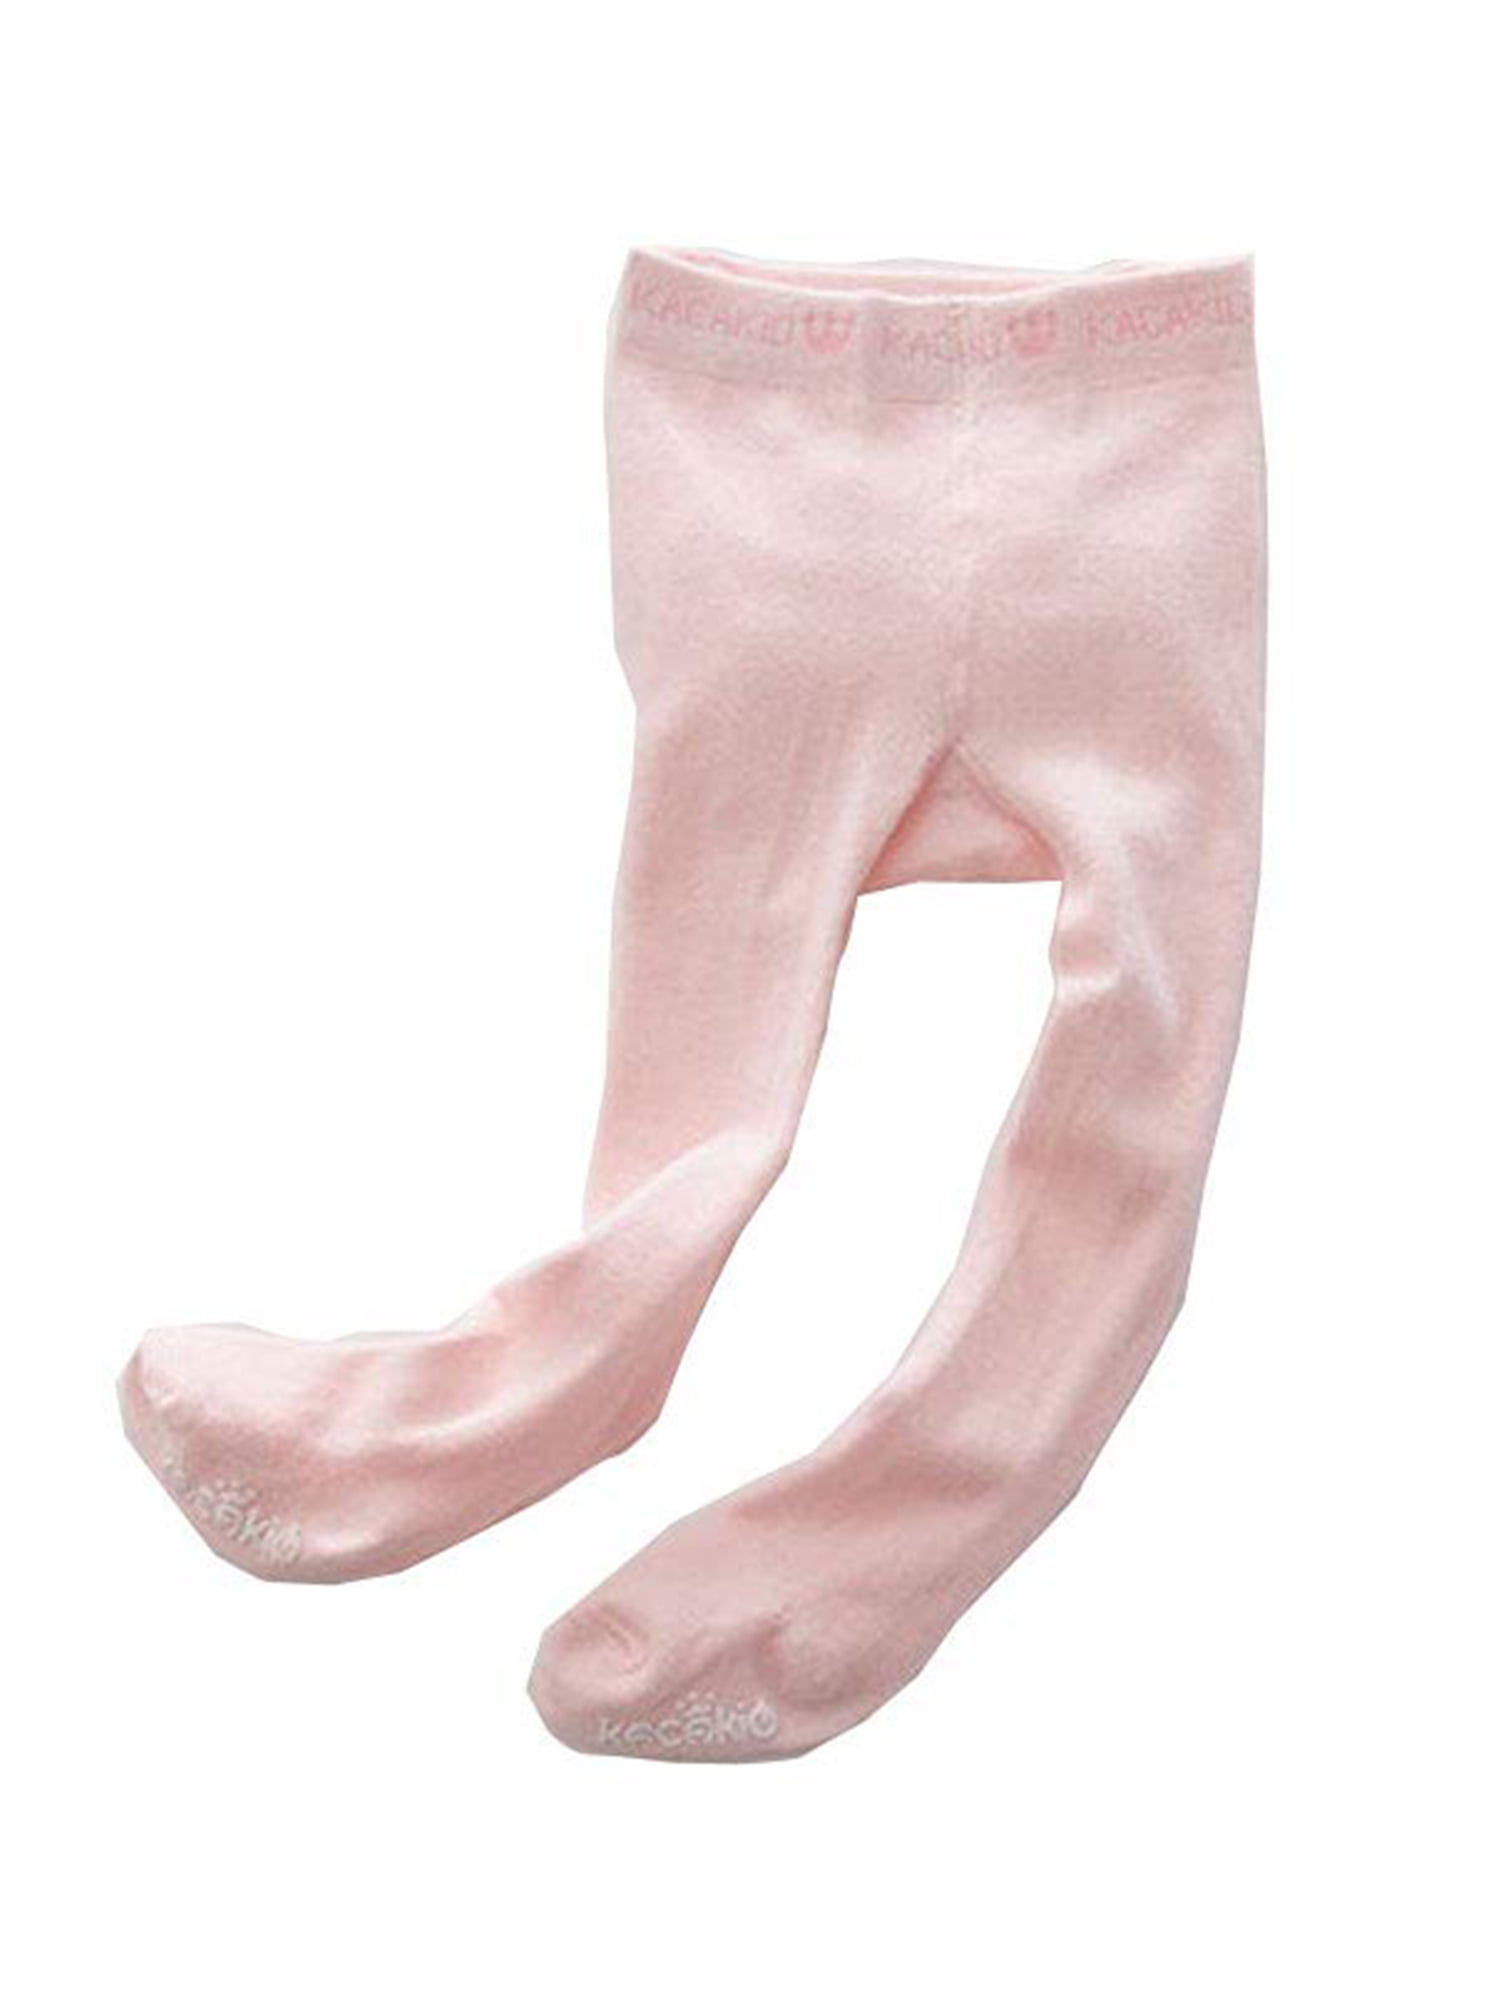 Baby Girls Embroidery Ruffle Tights Toddlers Cotton Pantyhose Footed Stocking Leggings 